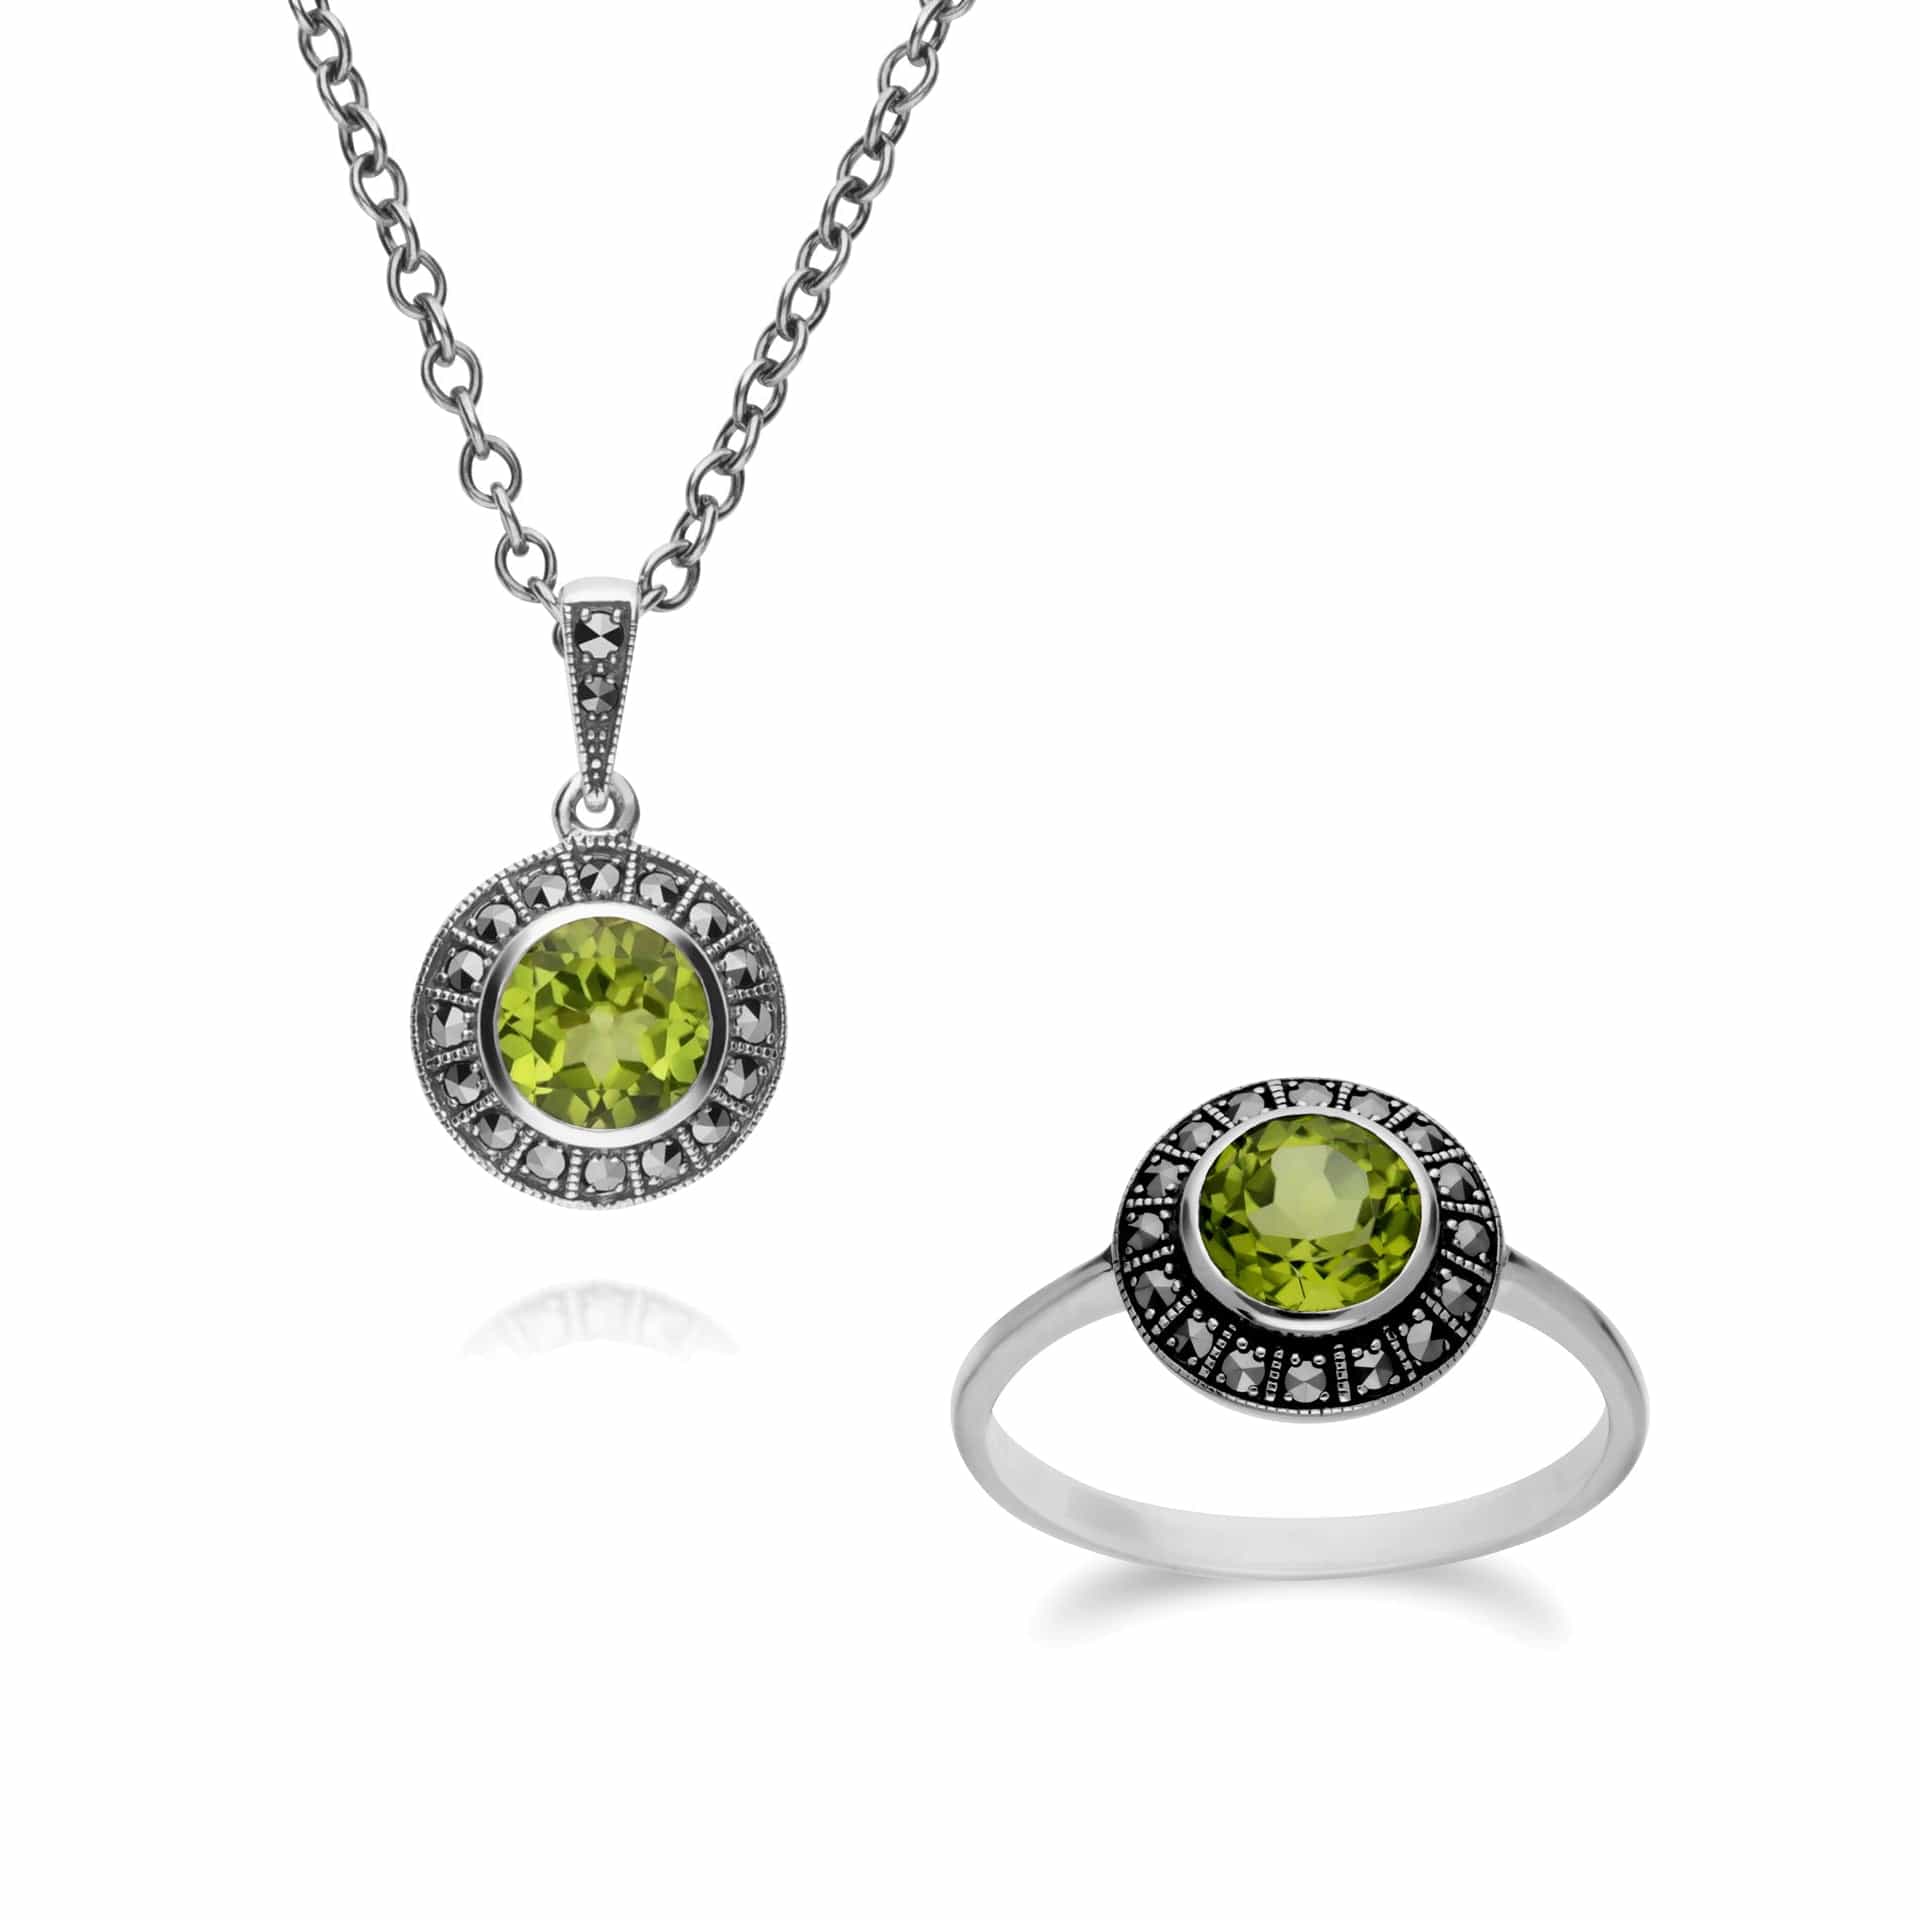 214N707304925-214R605604925 Art Deco Style Round Peridot and Marcasite Cluster Rings & Pendant Set in 925 Sterling Silver 1